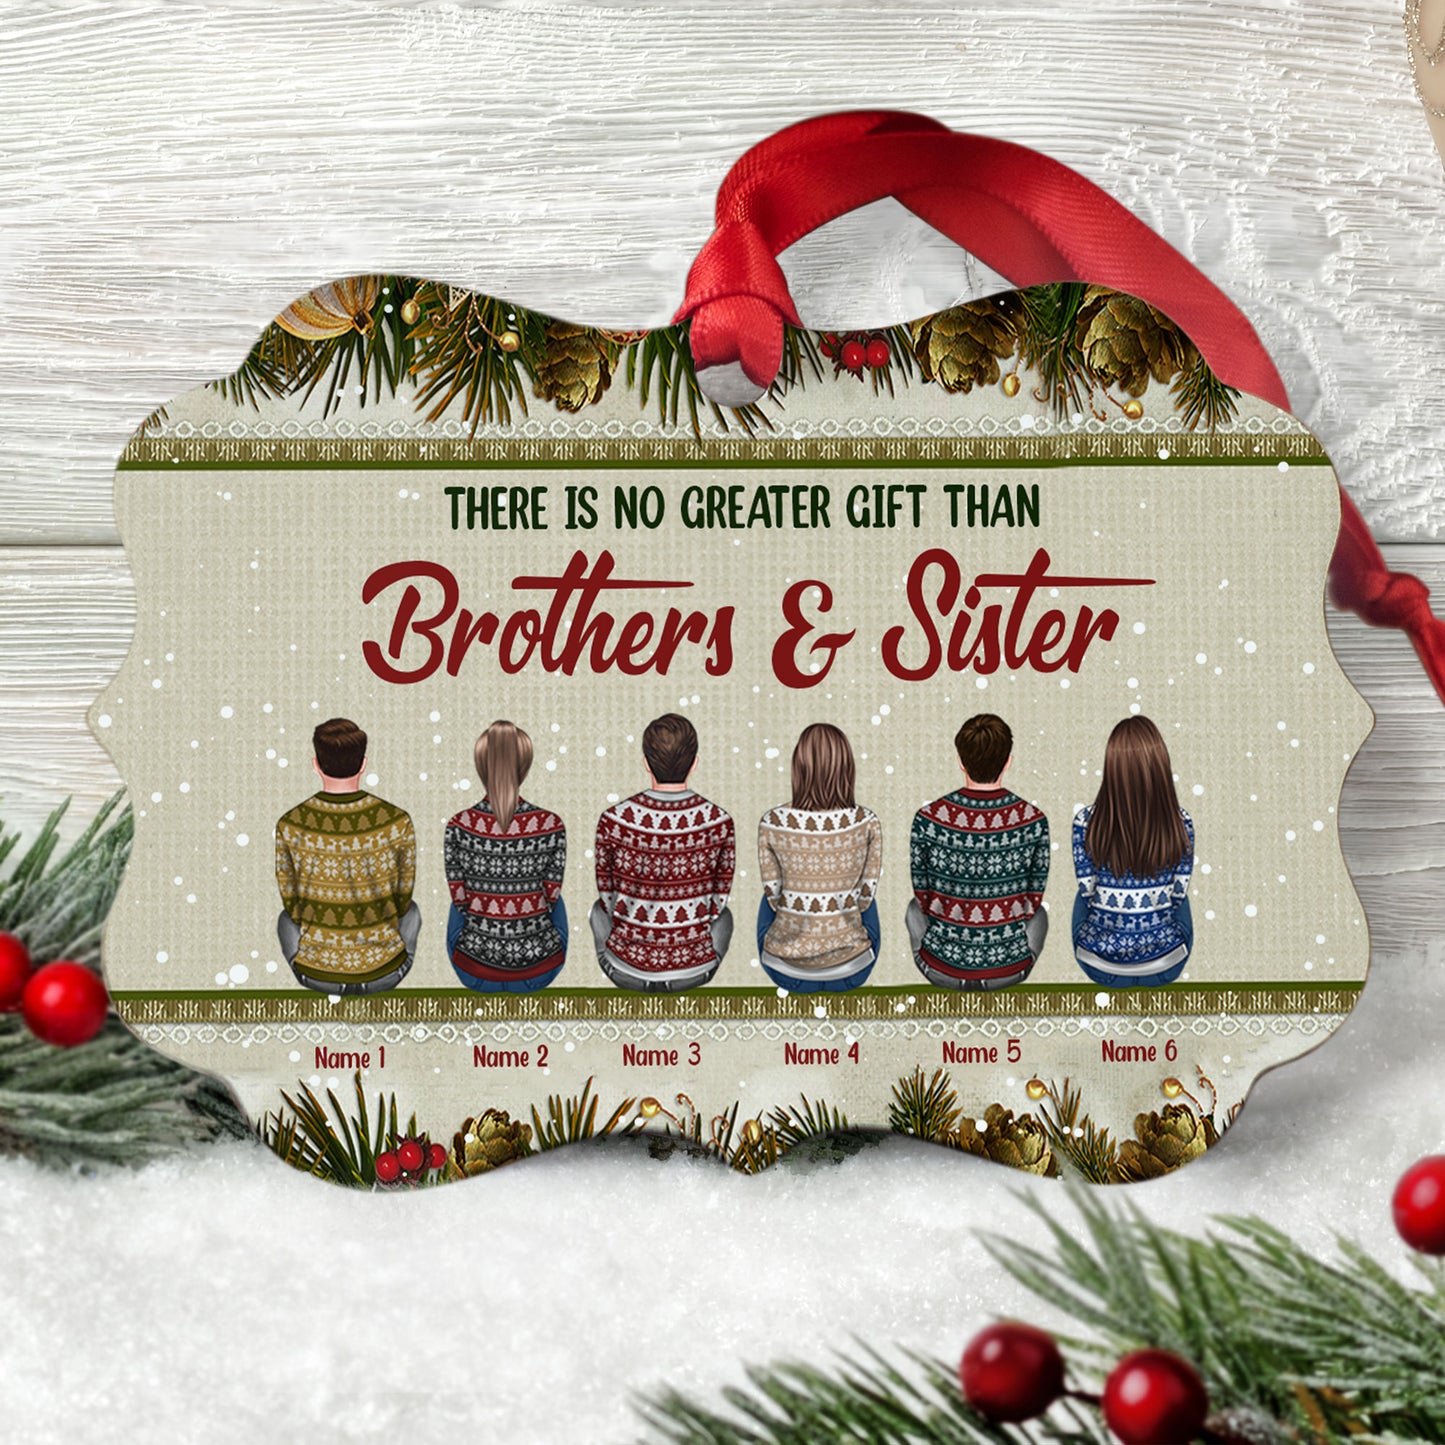 There Is No Greater Gift Than Brothers & Sister - Personalized Aluminum Ornament - Christmas Gift For Brothers And Sisters